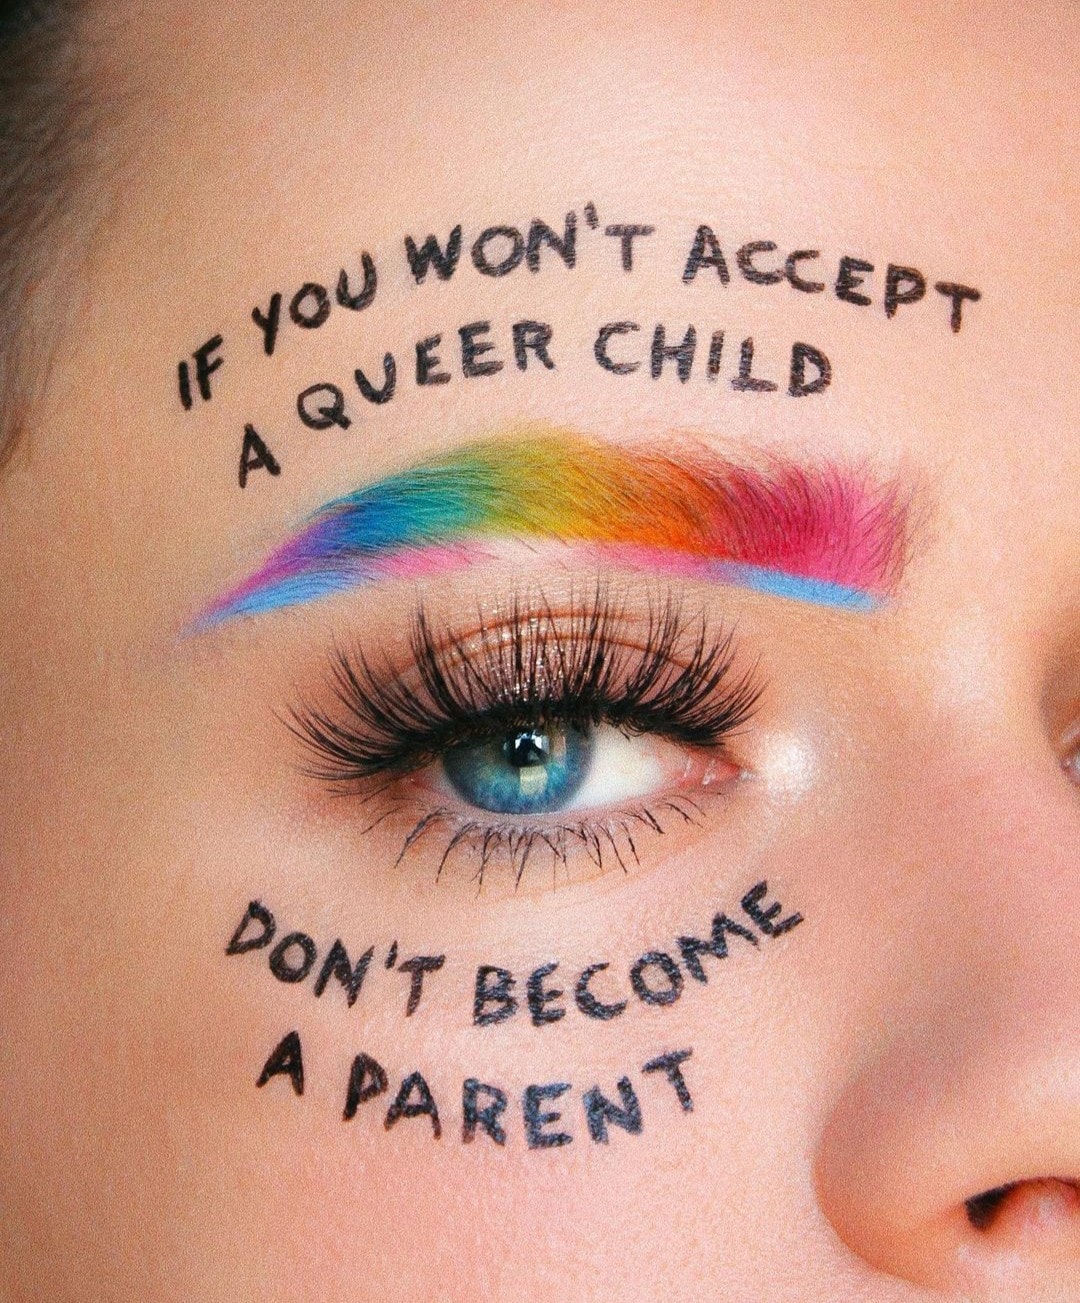 if you won't accept a queer child, don't become a parent